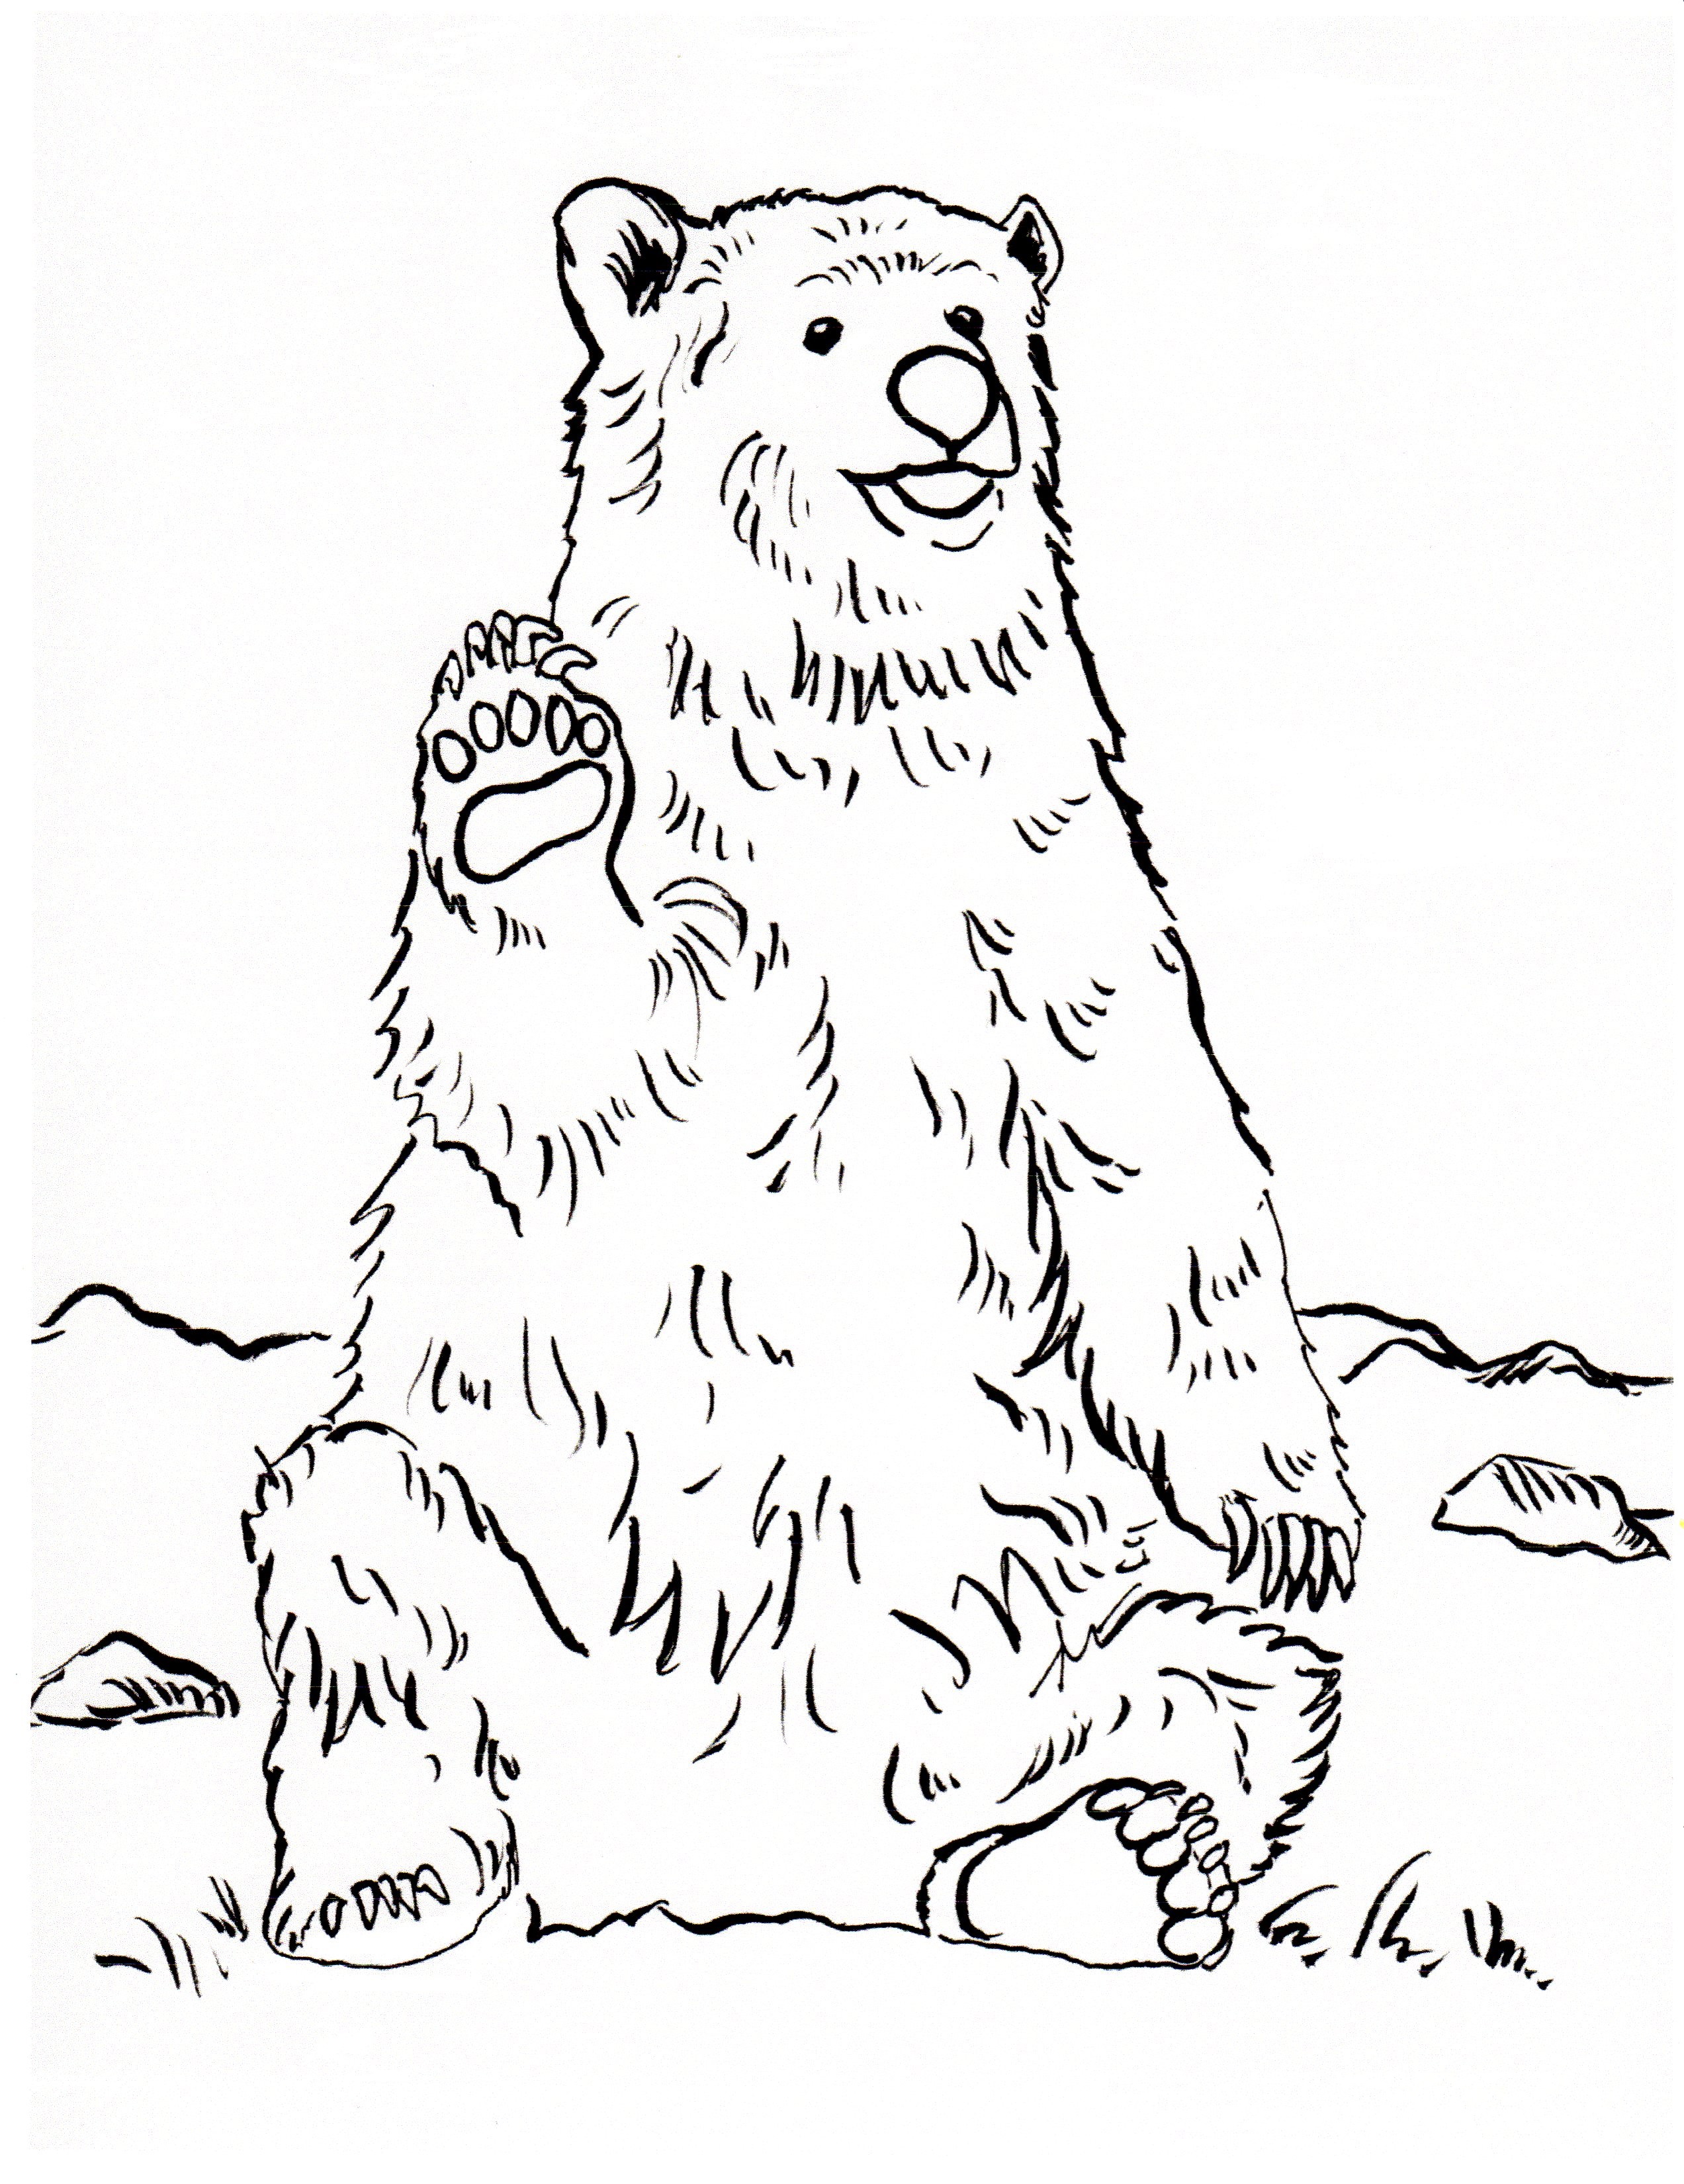 Grizzly Bear Coloring Page - Art Starts for Kids